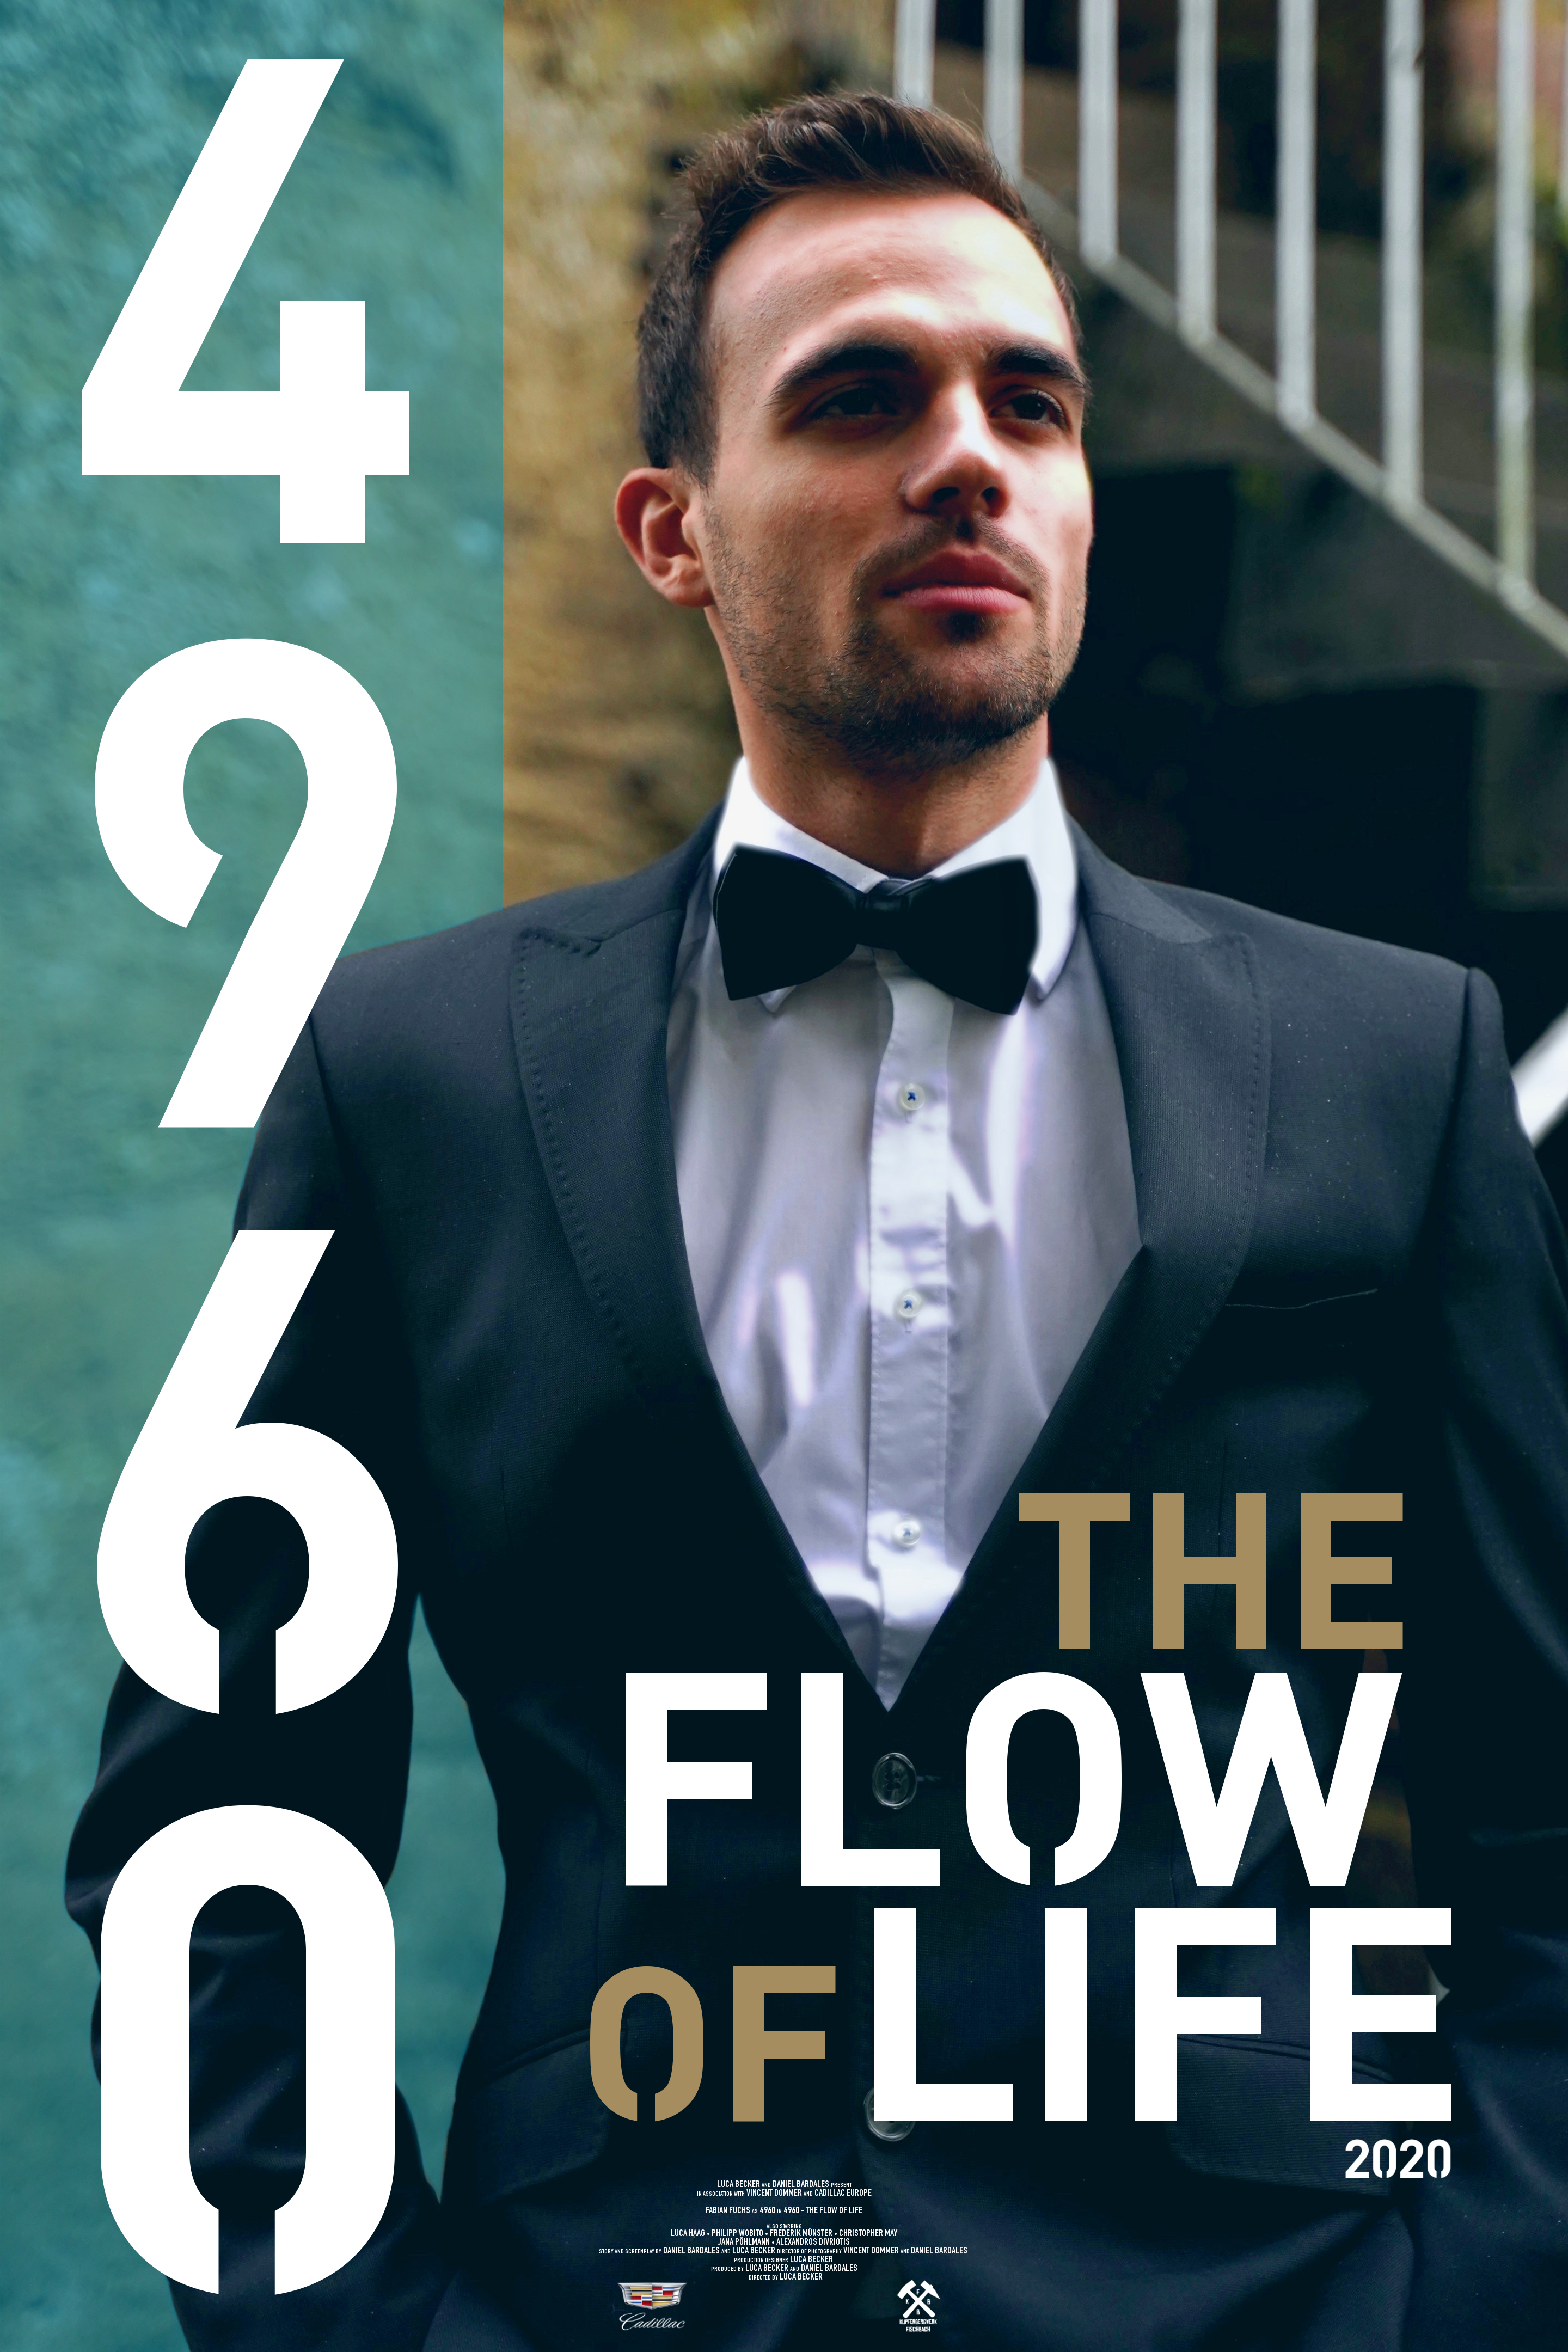 4960 - The Flow of Life